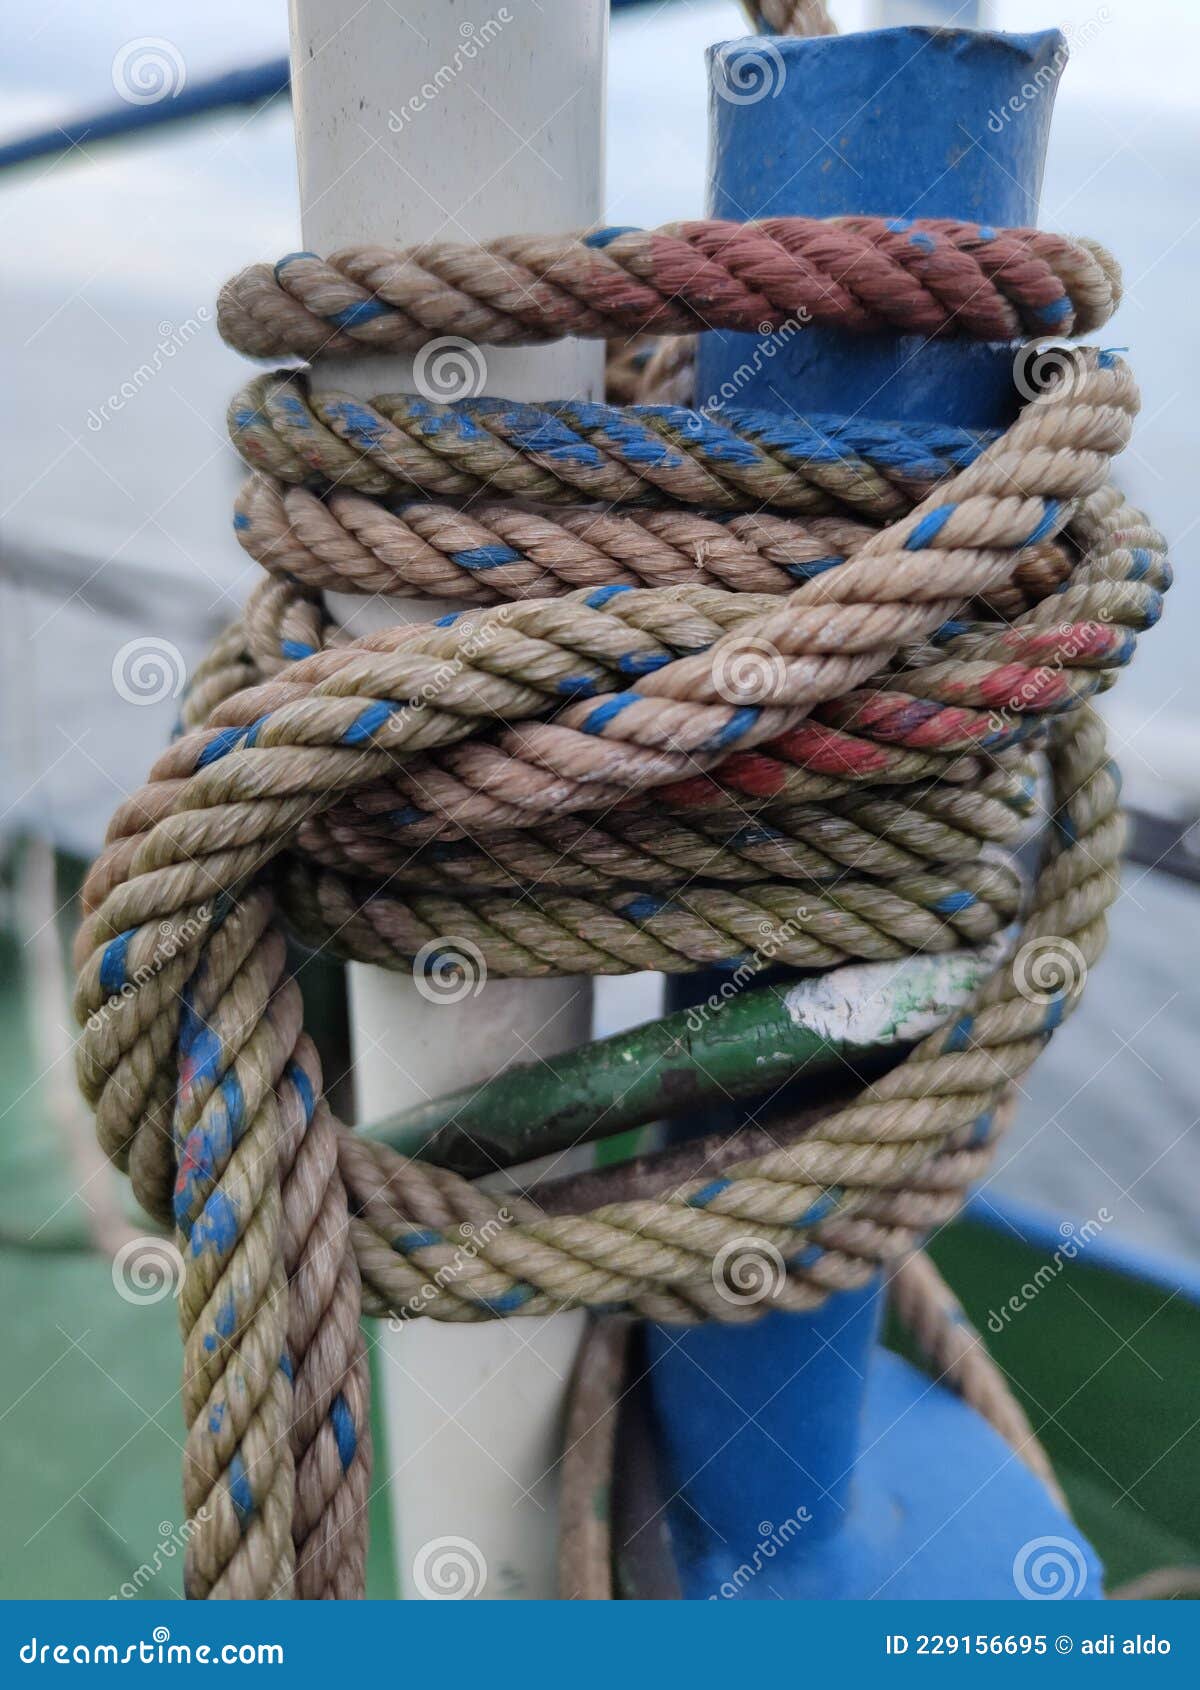 White Rope with a Binding Fiber that Binds on the Boat 22 Stock